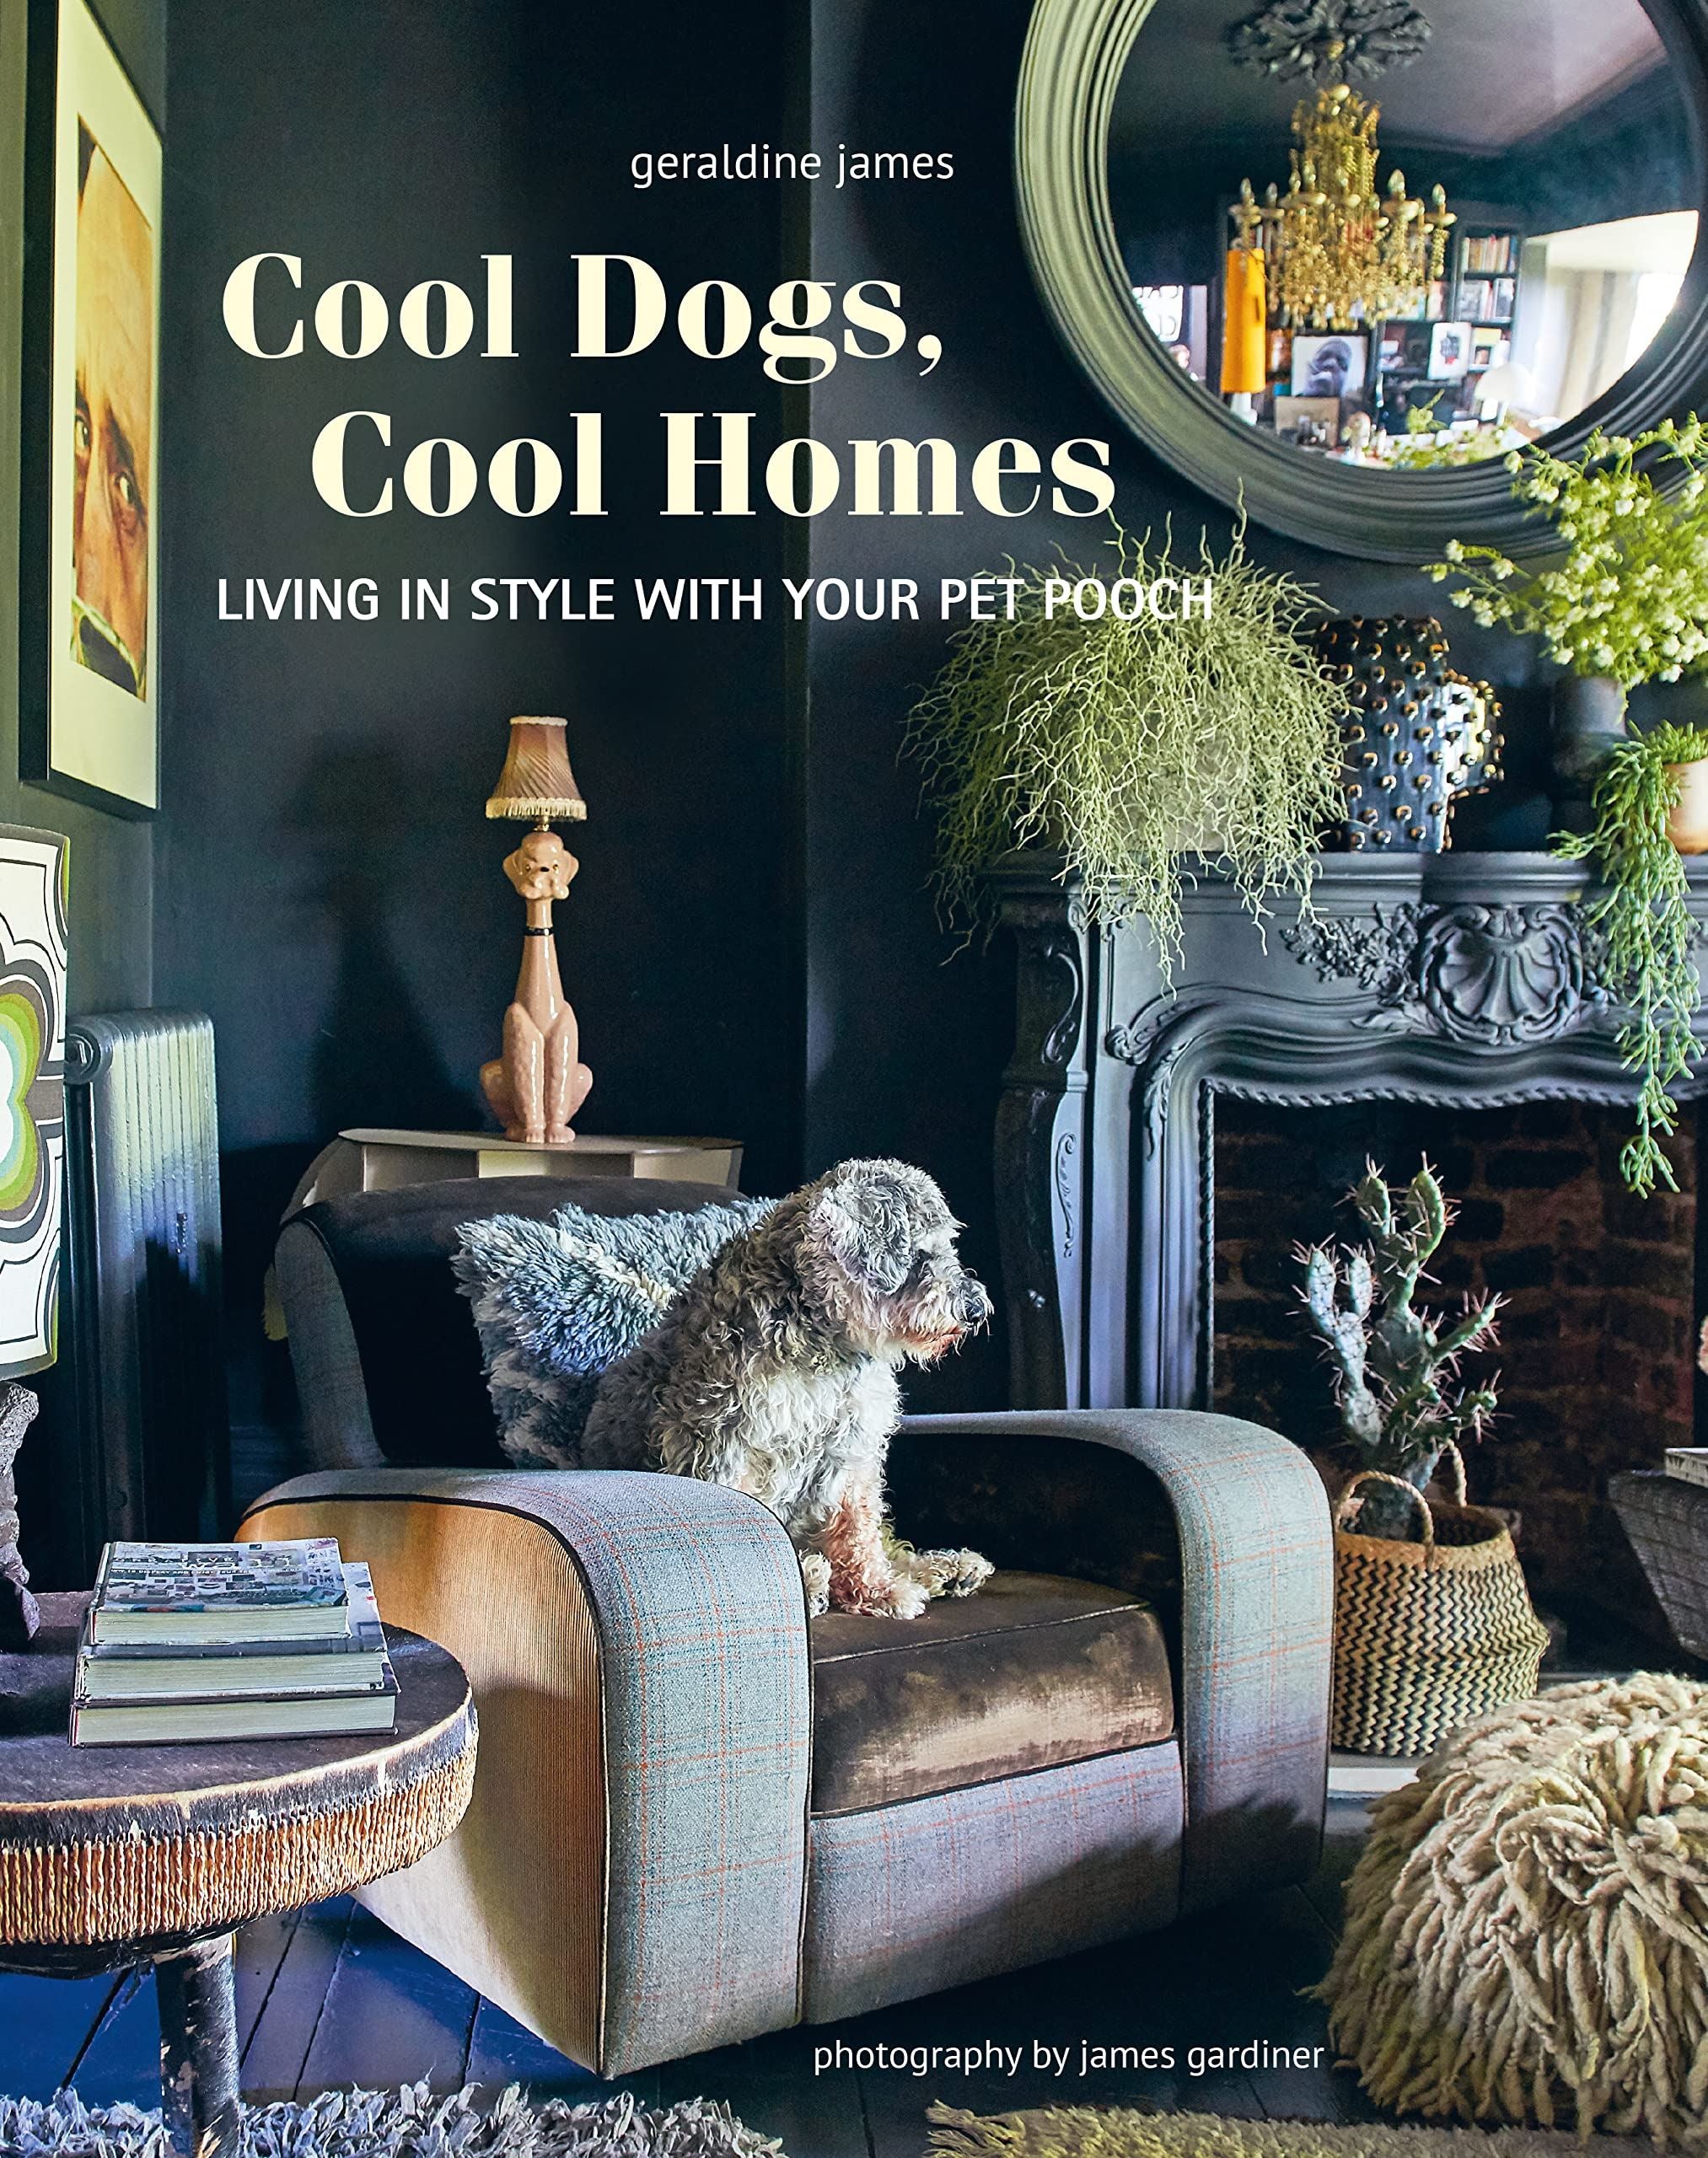 Cool Dogs Cool Homes | Book | by Geraldine James - Lifestory